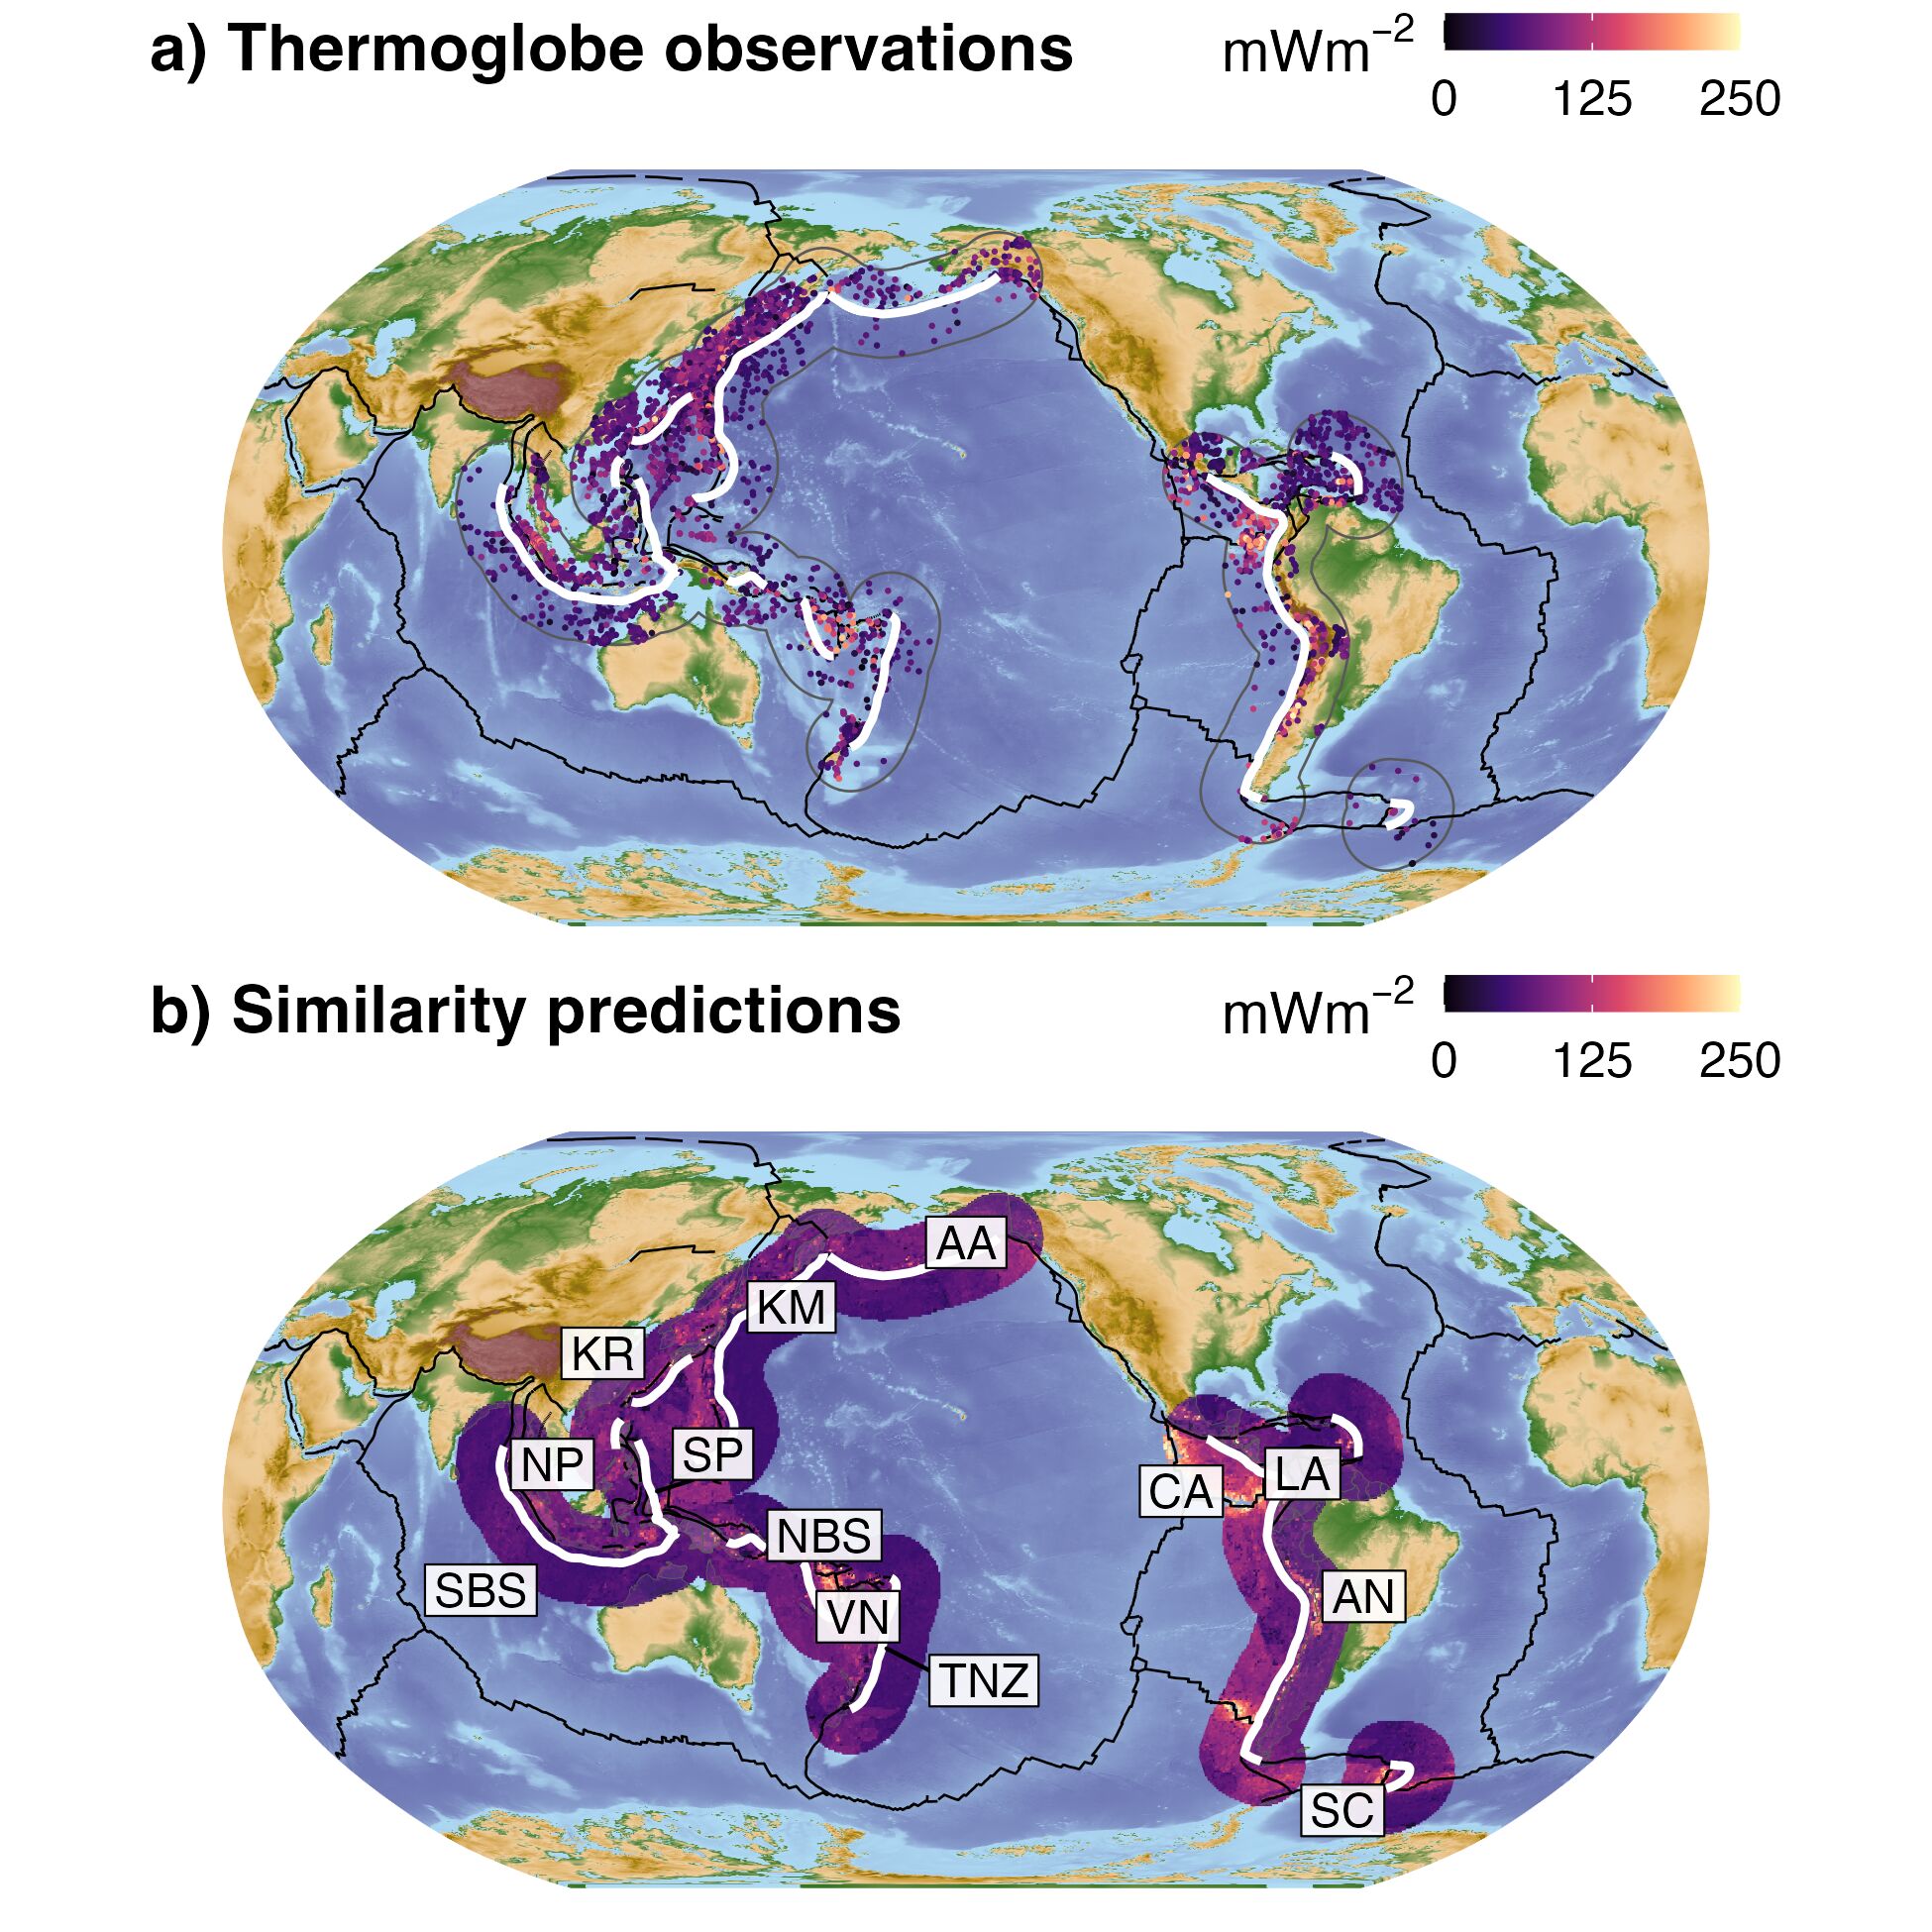 Regional surface heat flow near subduction zone segments. (a) ThermoGlobe data from Lucazeau (2019) cropped within 1000 km-radius buffers around 13 active subduction zone segments show uneven regional coverage. For example, note the relatively high observational density in the NW Pacific compared to other regions. (b) In contrast, a Similarity interpolation cropped within the same buffers presents an evenly-distributed approximation of regional surface heat flow. Similarity interpolation from Lucazeau (2019). Subduction zone boundaries (bold white lines) defined by Syracuse & Abers (2006). Plate boundaries (bold black lines) defined by Lawver et al. (2018). AA: Alaska Aleutians, AN: Andes, CA: Central America, KM: Kamchatka Marianas, KR: Kyushu Ryukyu, LA: Lesser Antilles, NBS: New Britain Solomon, NP: N Philippines, SBS: Sumatra Banda Sea, SC: Scotia, SP: S Philippines, TNZ: Tonga New Zealand, VN: Vanuatu.